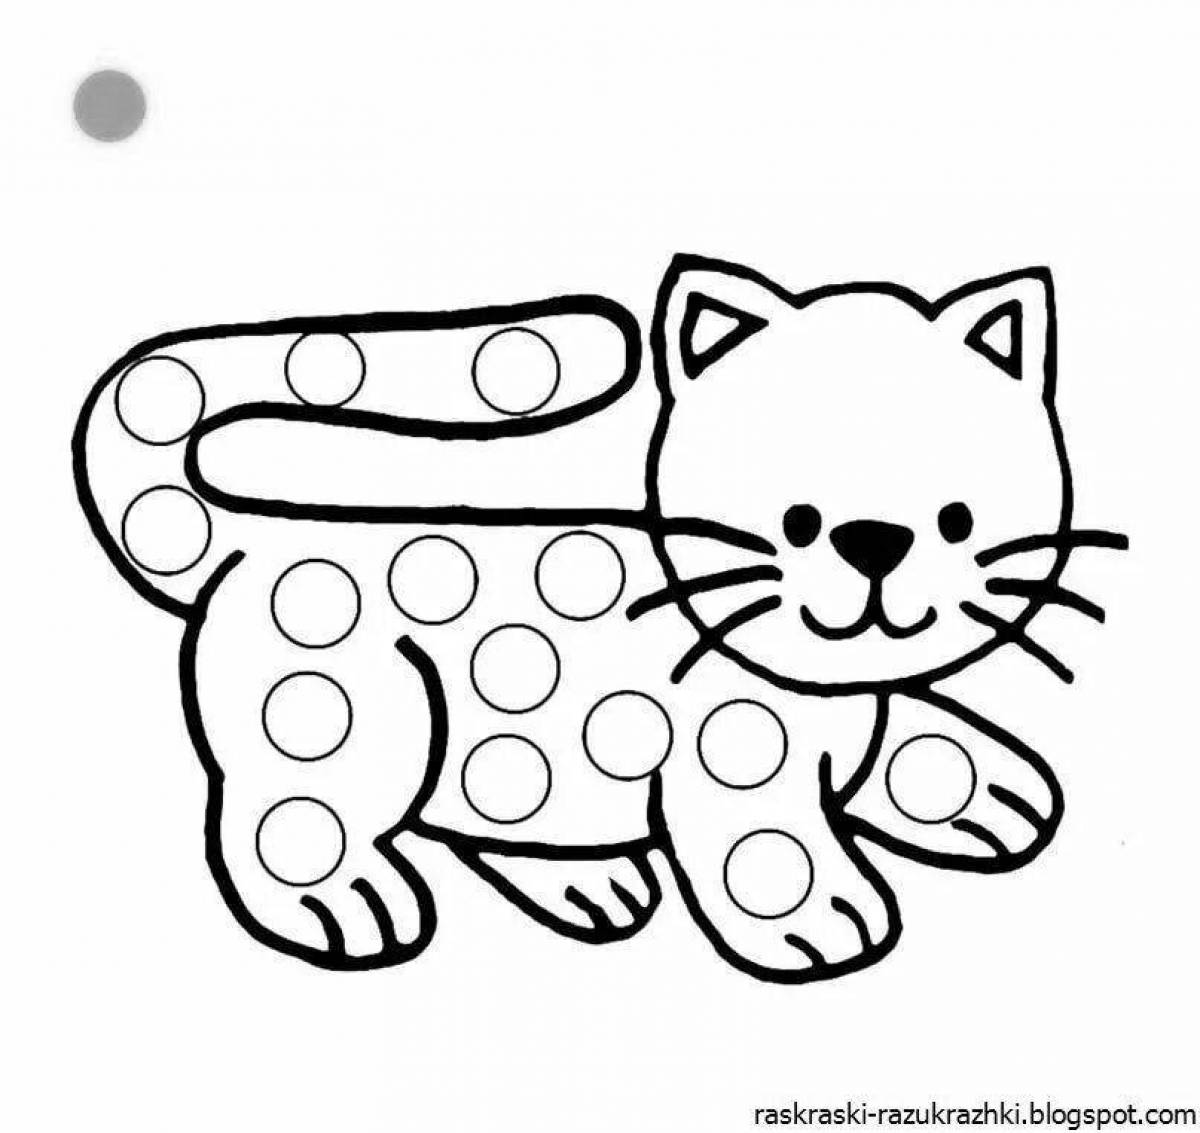 Playful kitten coloring book for 2-3 year olds